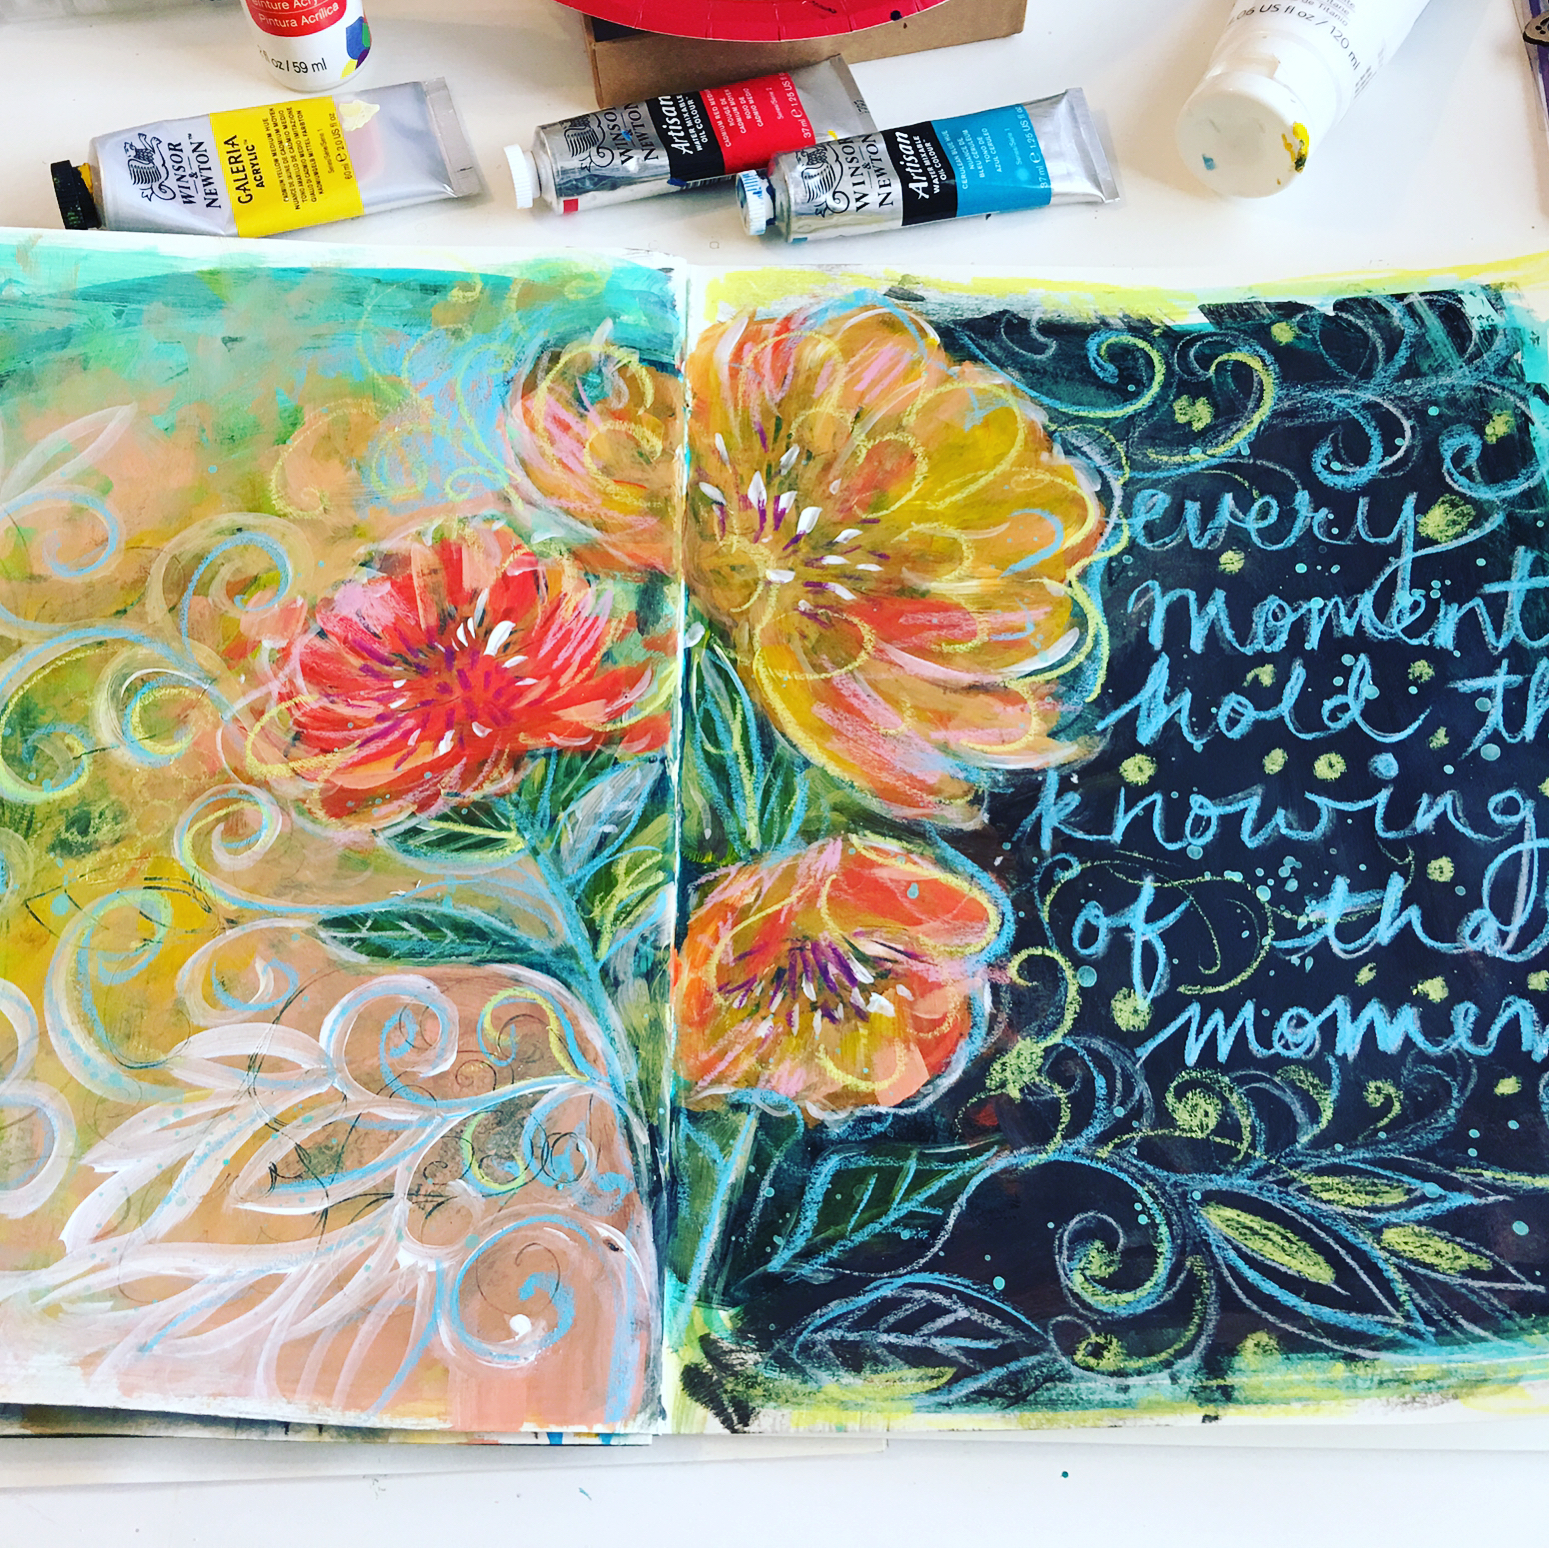 Daily art Journaling ~ Day 292
Every moment hold the knowing of that moment...